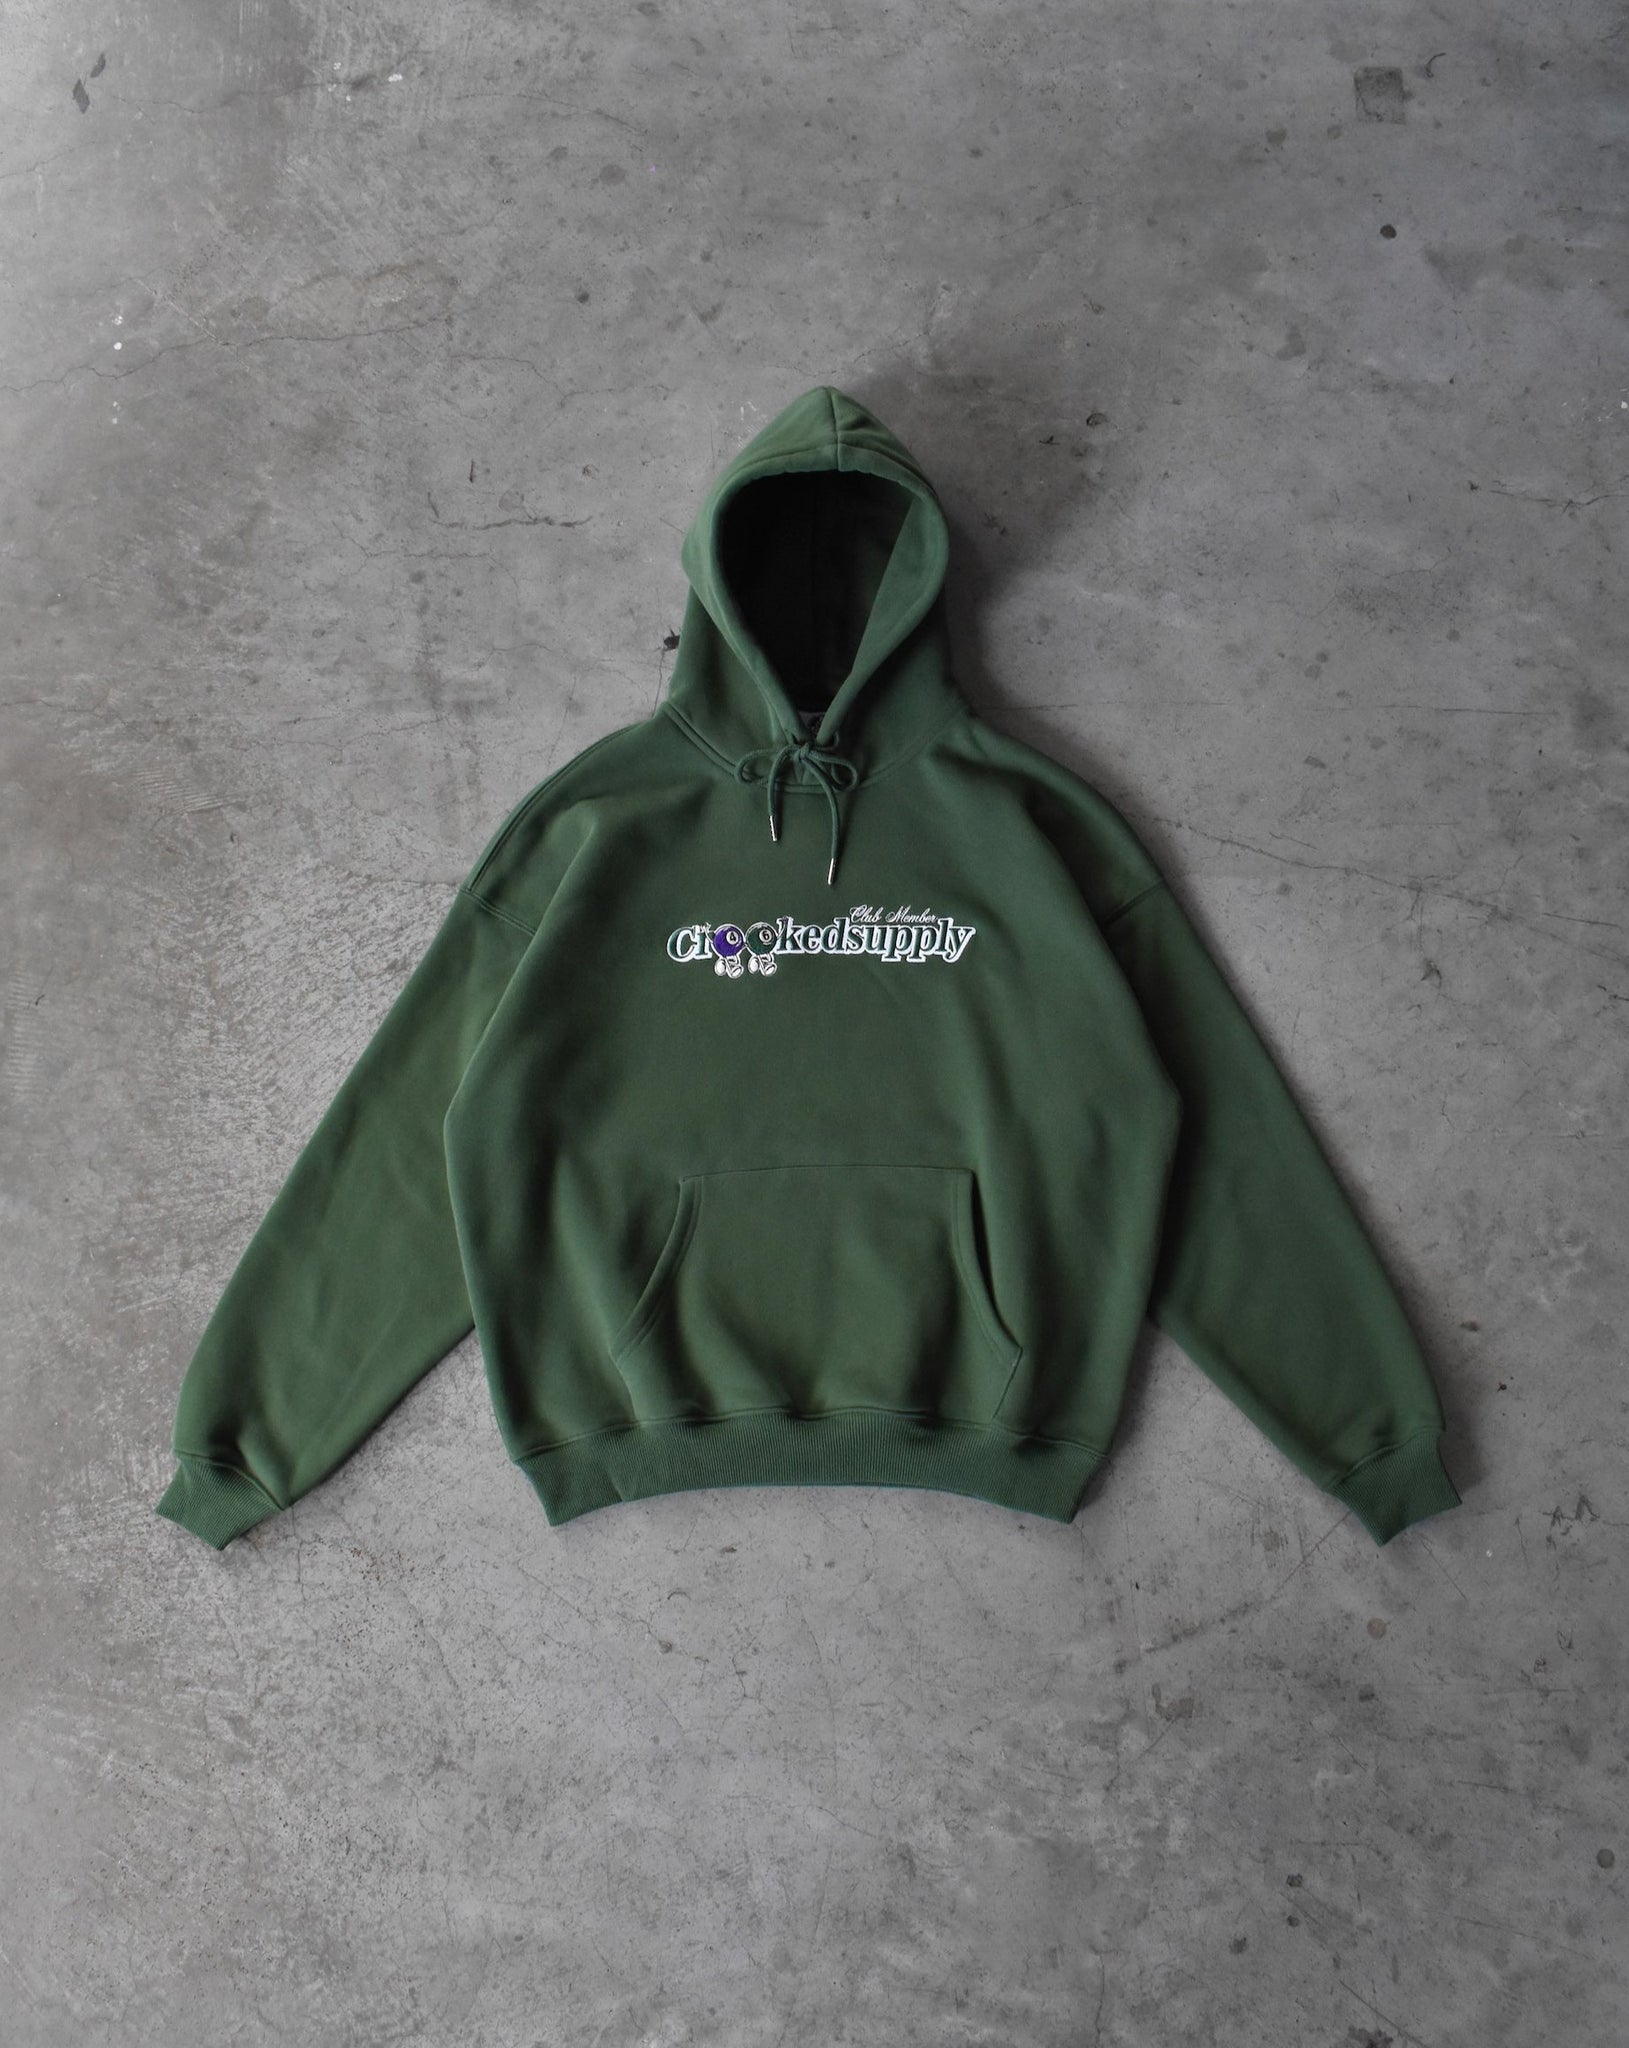 (New) Club Member Hoodie - Green (Embroidered)